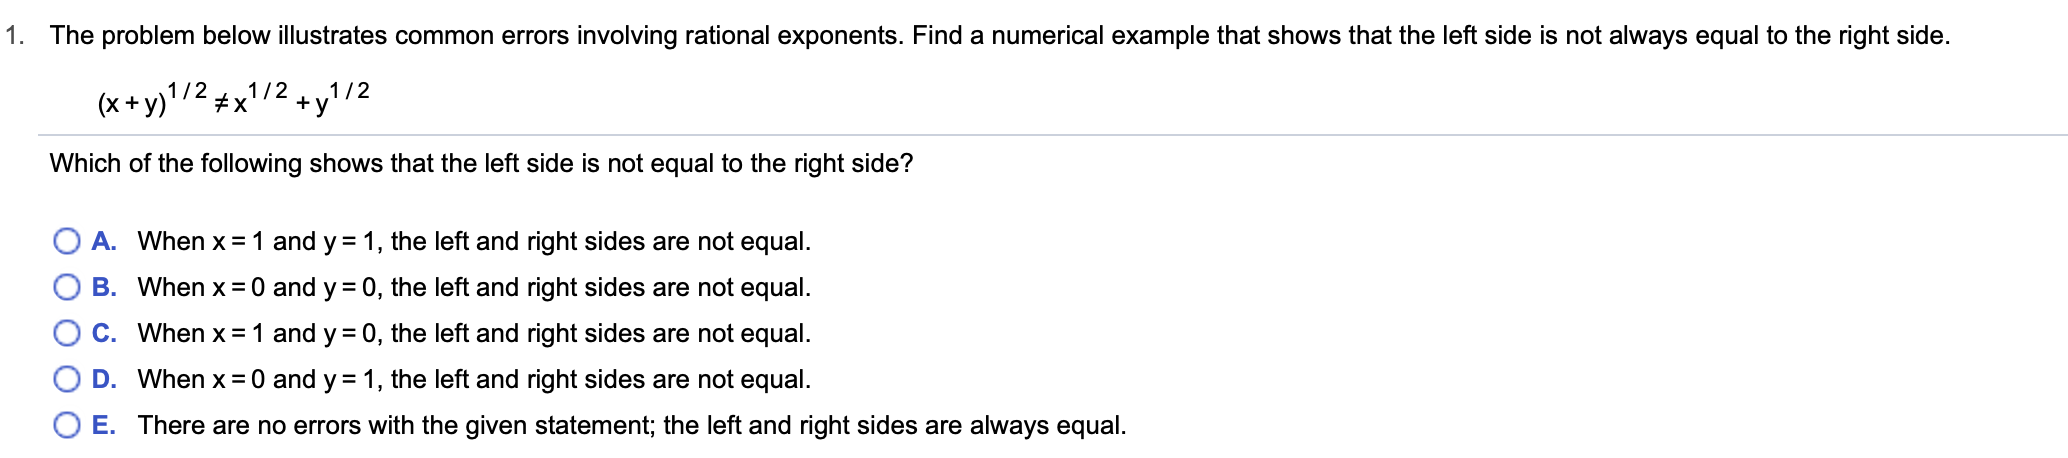 1. The problem below illustrates common errors involving rational exponents. Find a numerical example that shows that the left side is not always equal to the right side.
1/ 21/2
x
(x+y)1/2
y
Which of the following shows that the left side is not equal to the right side?
A. When x 1 and y = 1, the left and right sides are not equal
B. When x 0 and y 0, the left and right sides are not equal
C. When x 1 and y 0, the left and right sides are not equal.
D. When x 0 and y 1, the left and right sides are not equal.
O E. There are no errors with the given statement; the left and right sides are alwayss equal
